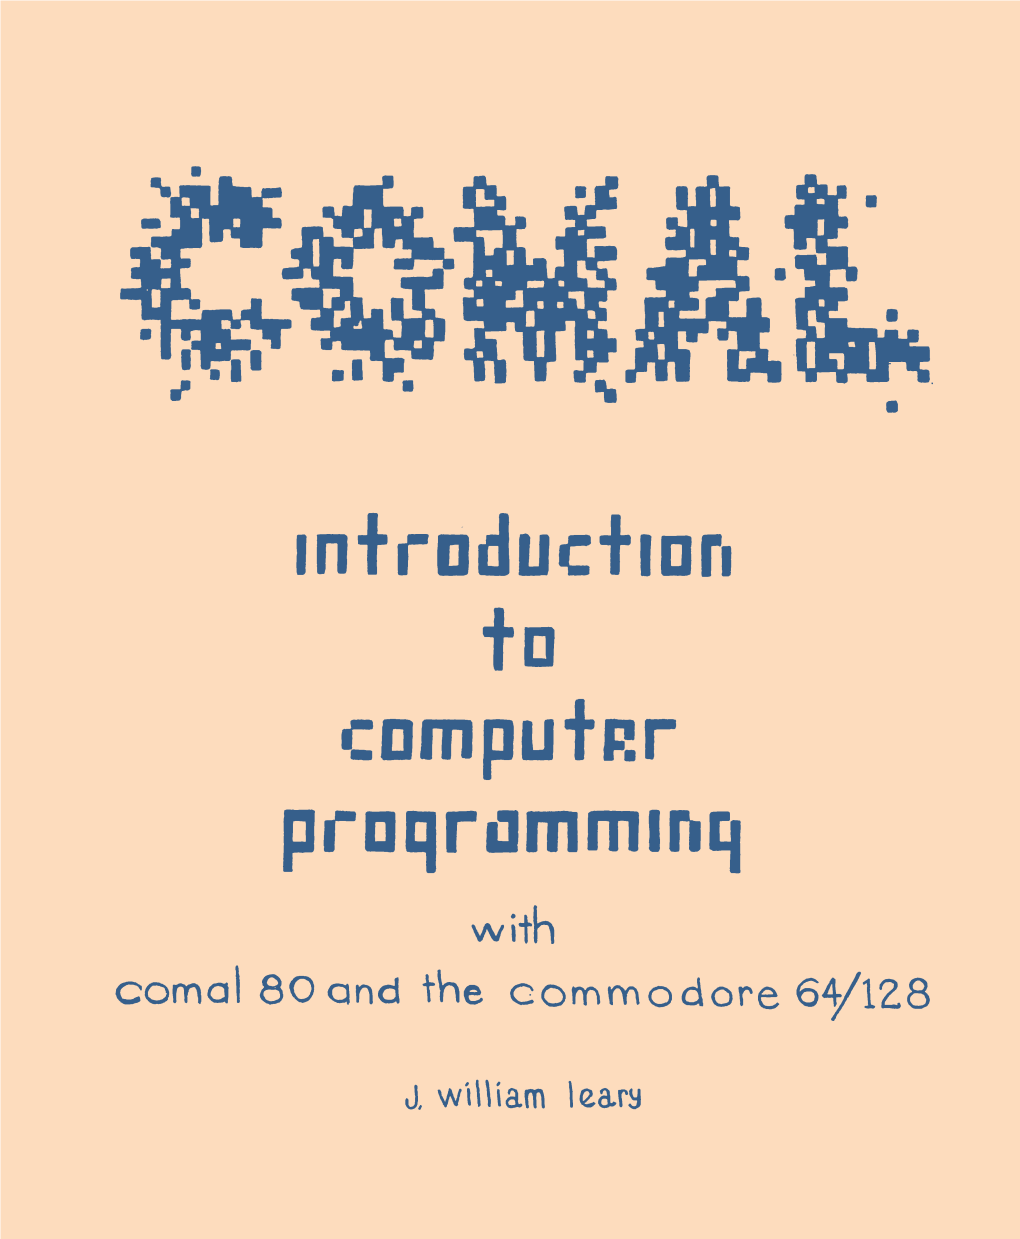 COMAL Introduction